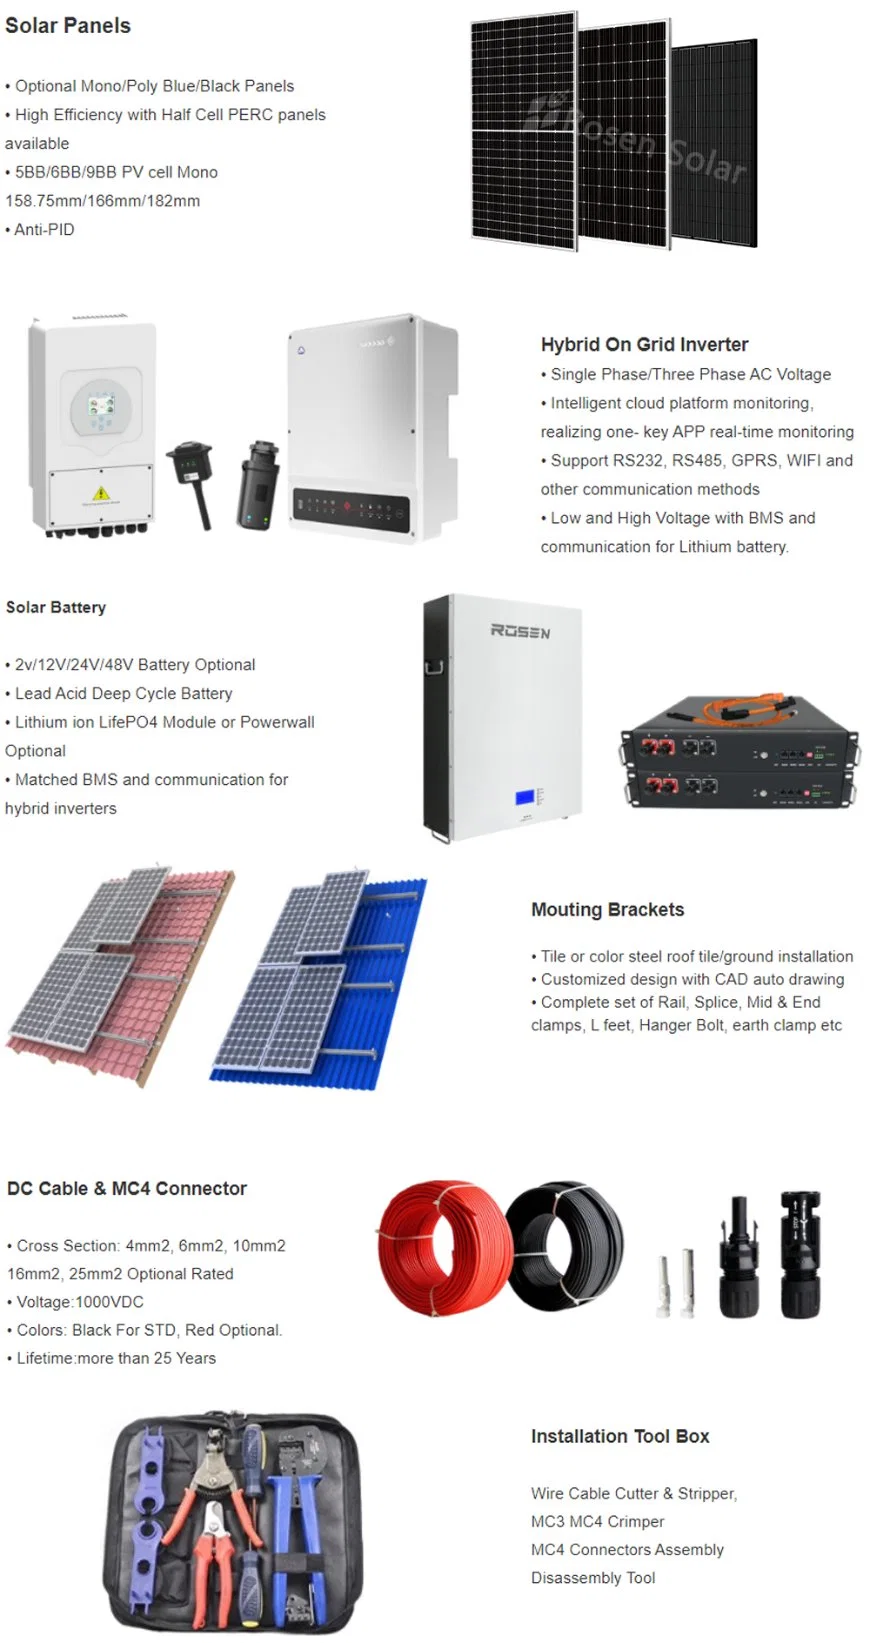 Solar Panels 10kw System Compete Photovoltaic Full Home Solar Energy Power Kit Price